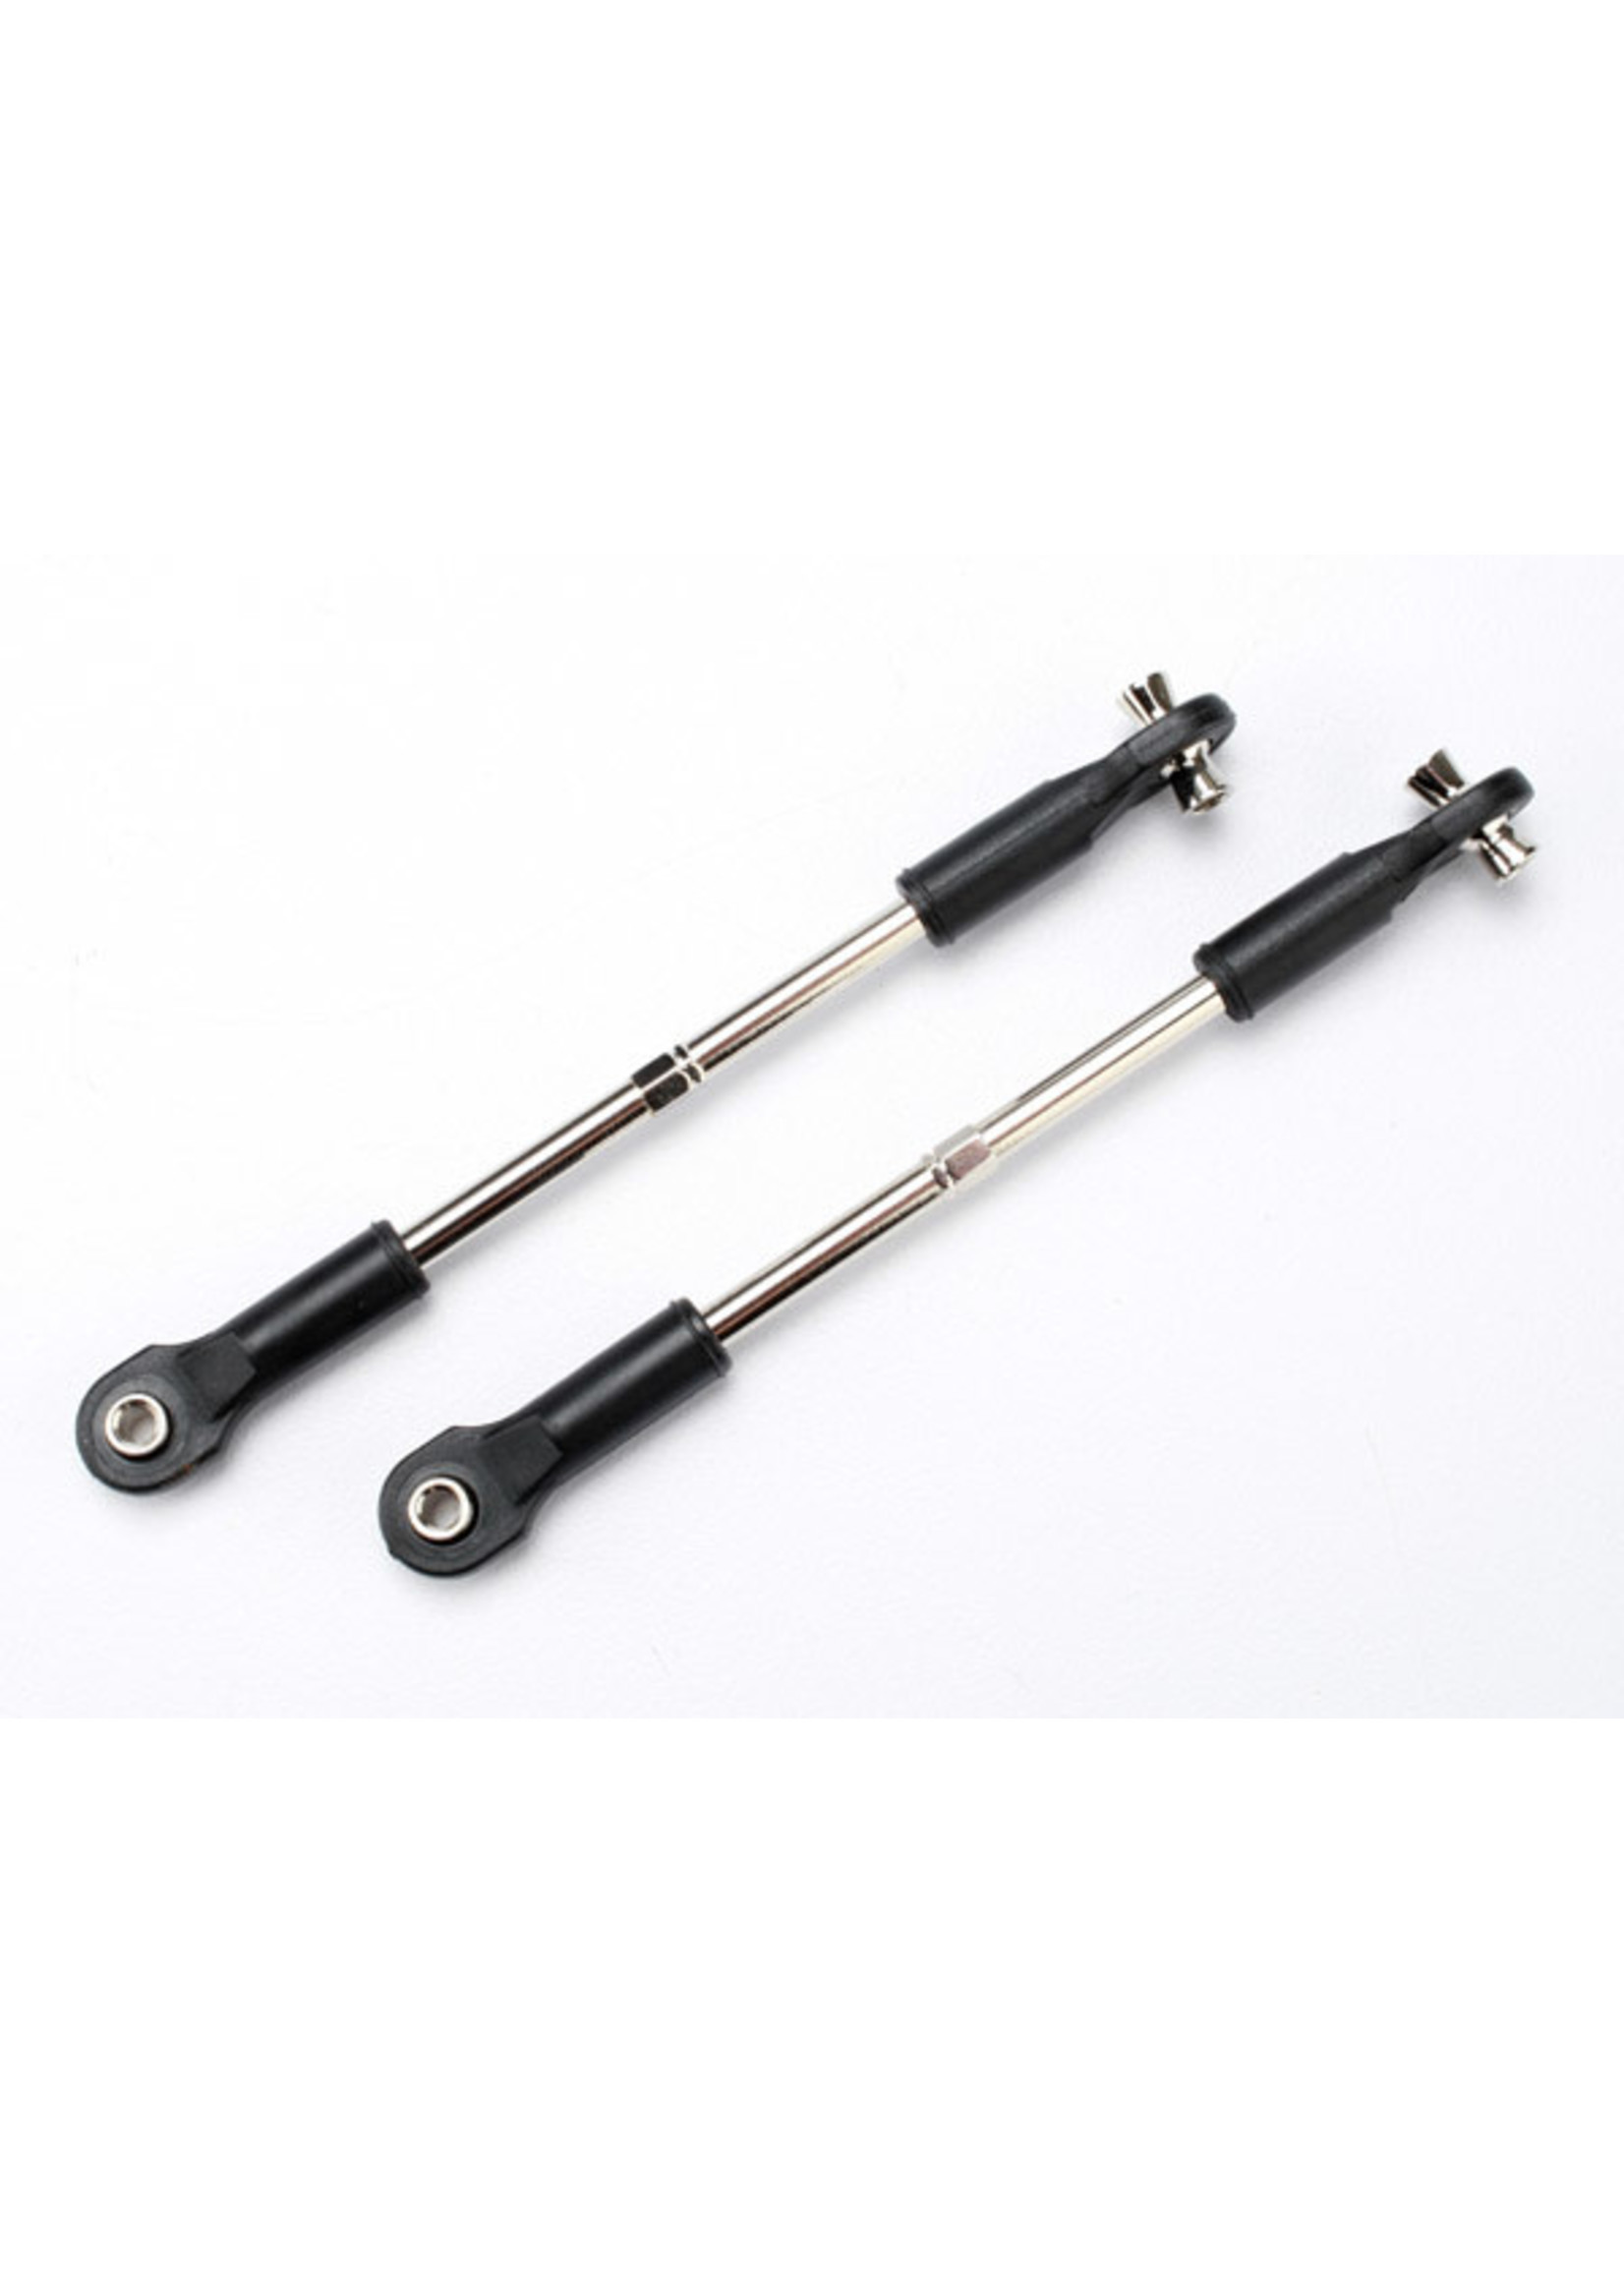 Traxxas TRA5939 Traxxas Turnbuckles, toe links, 72mm (2) (assembled with rod ends and hollow balls)